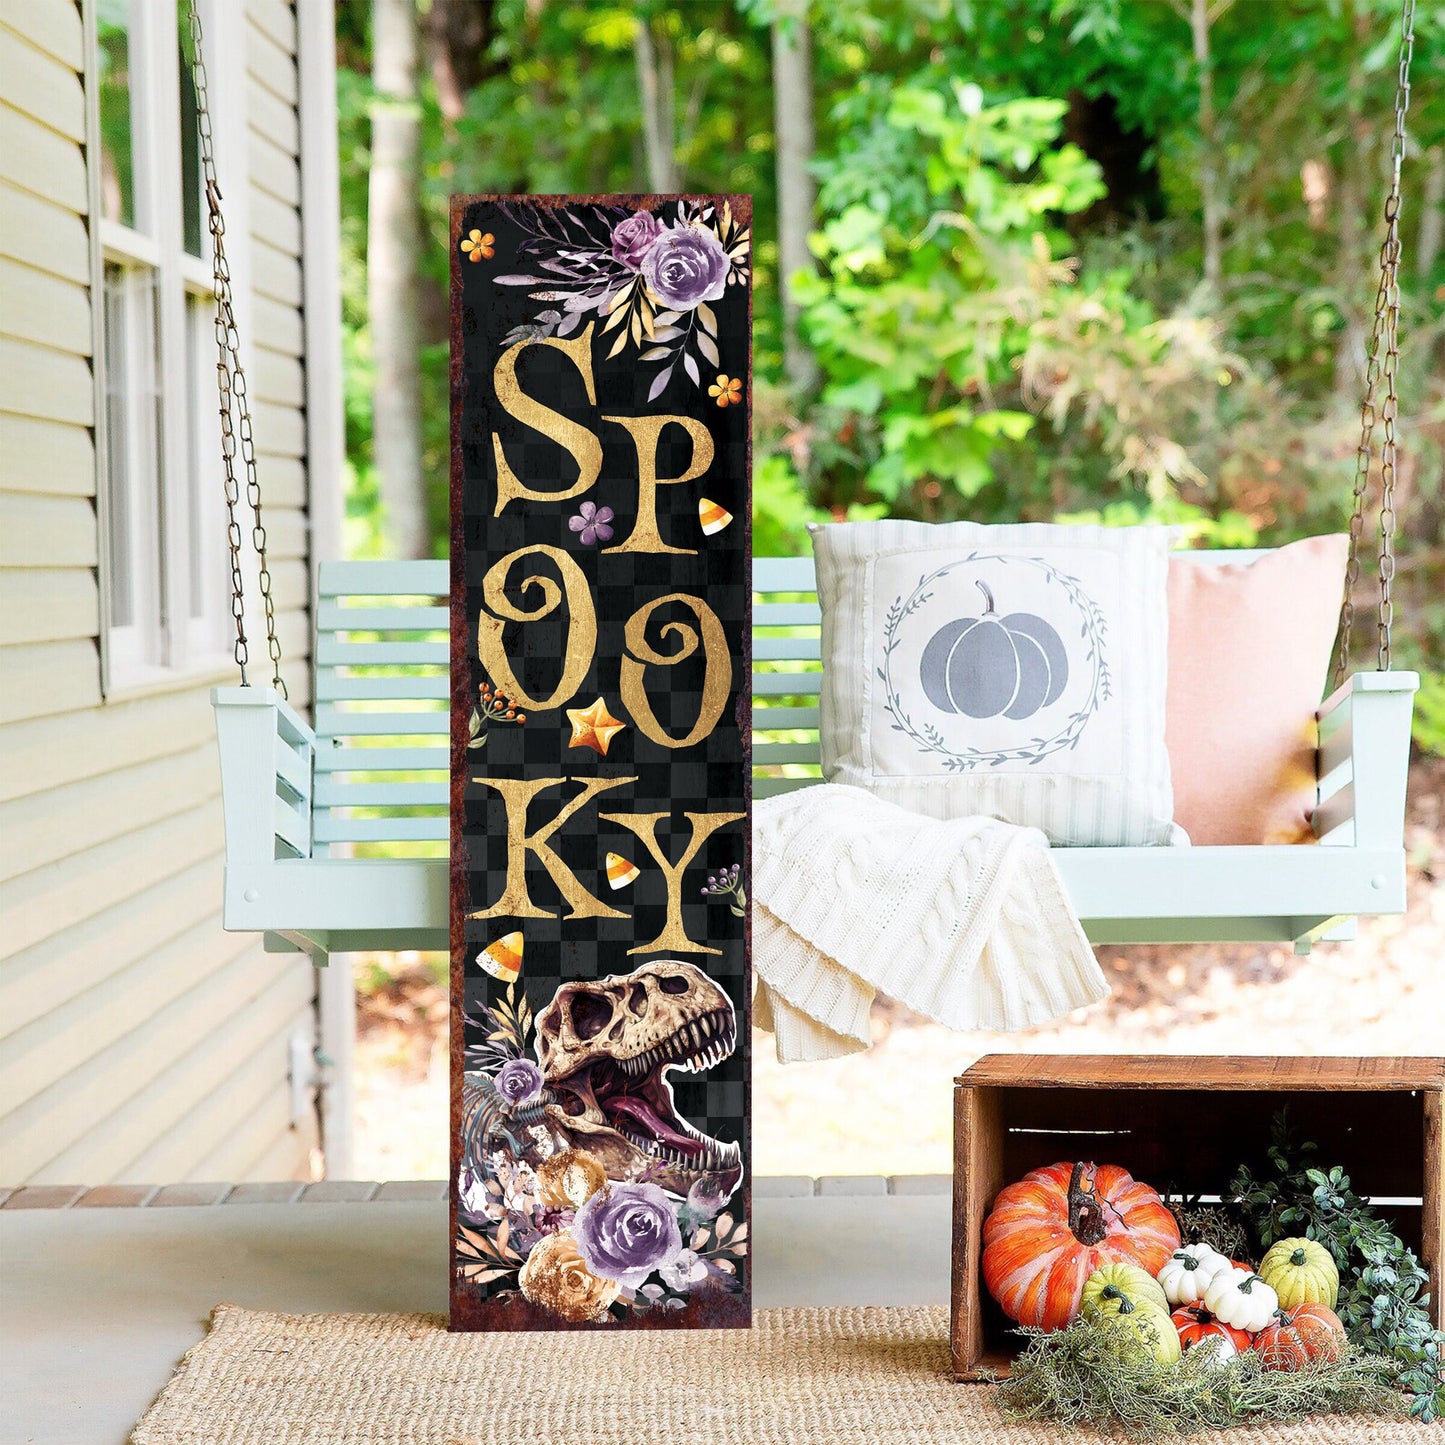 36in "Spooky" Halloween Porch Sign with Dinosaur Design - Front Porch Halloween Welcome Sign, Vintage Halloween Decoration,Modern Farmhouse